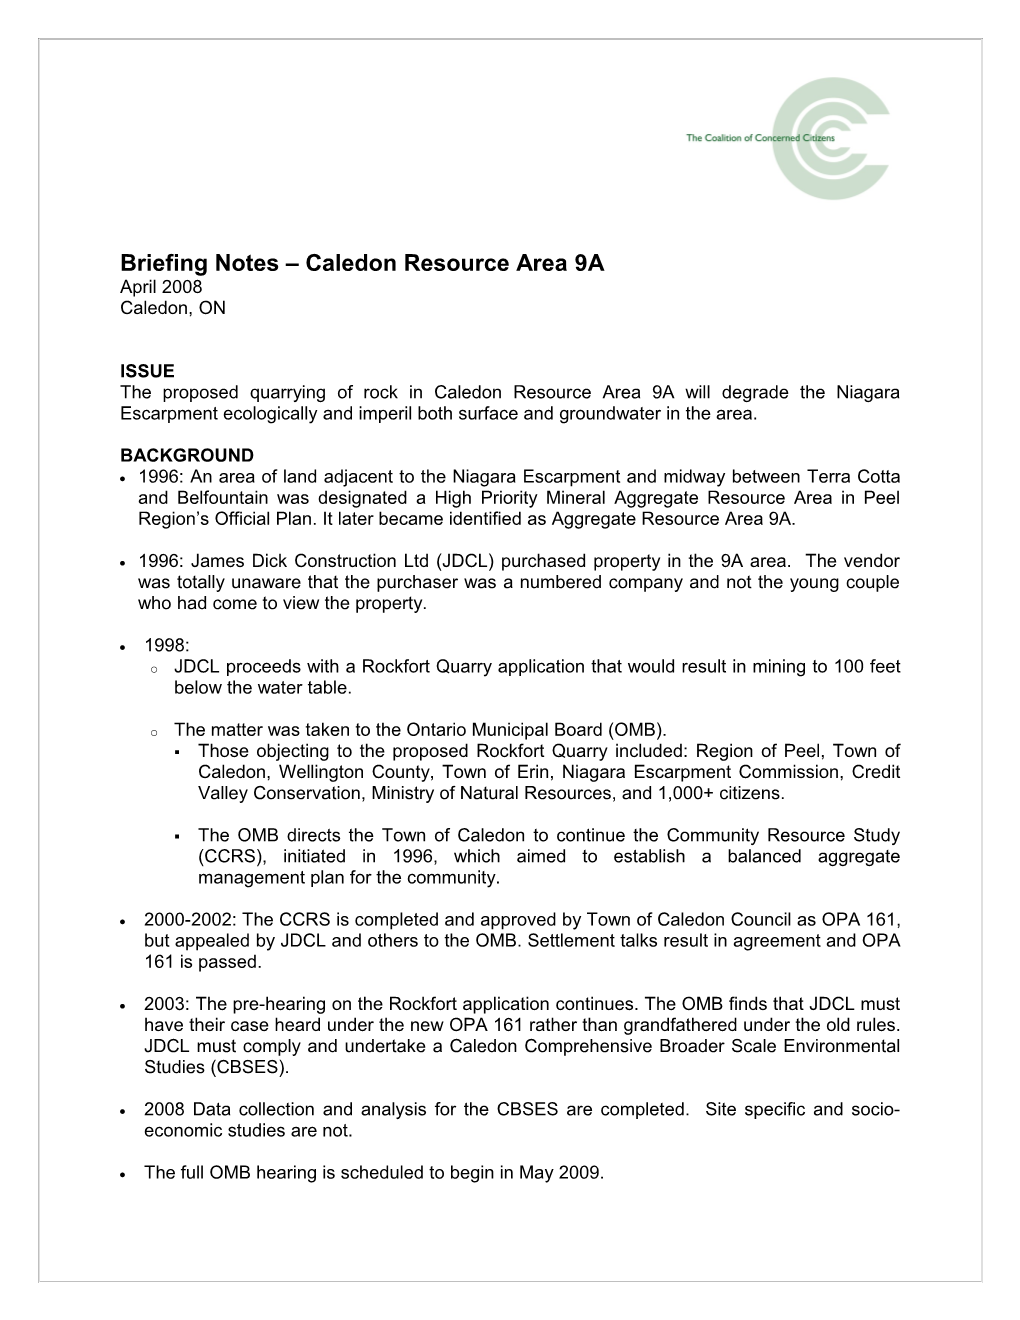 Briefing Notes Caledon Resource Area 9A